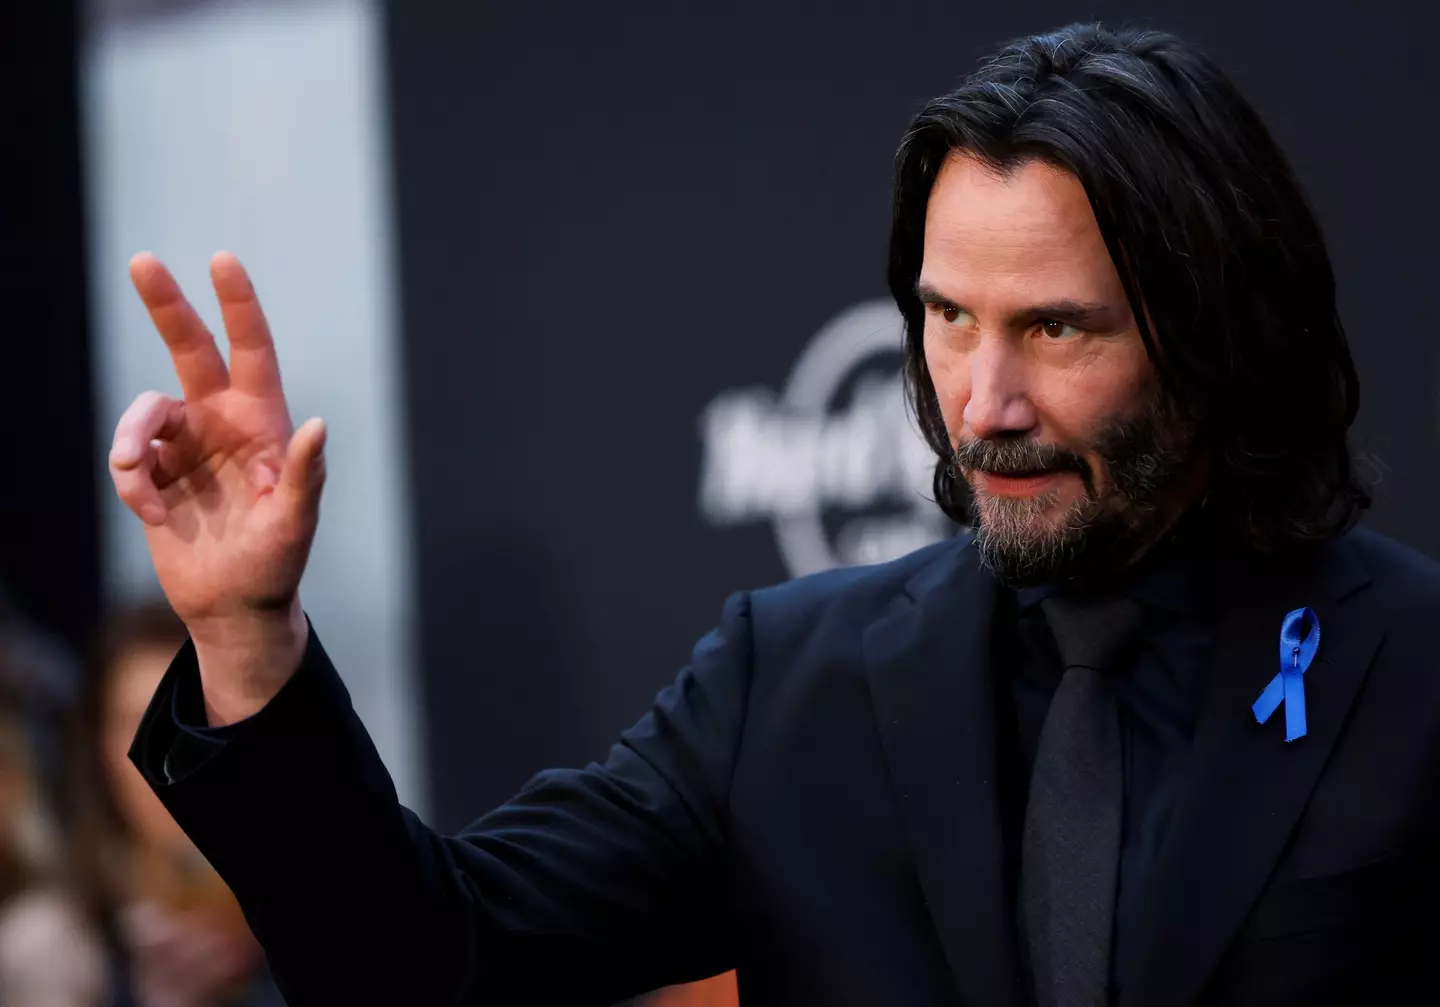 Reeves is promoting the fourth John Wick movie.